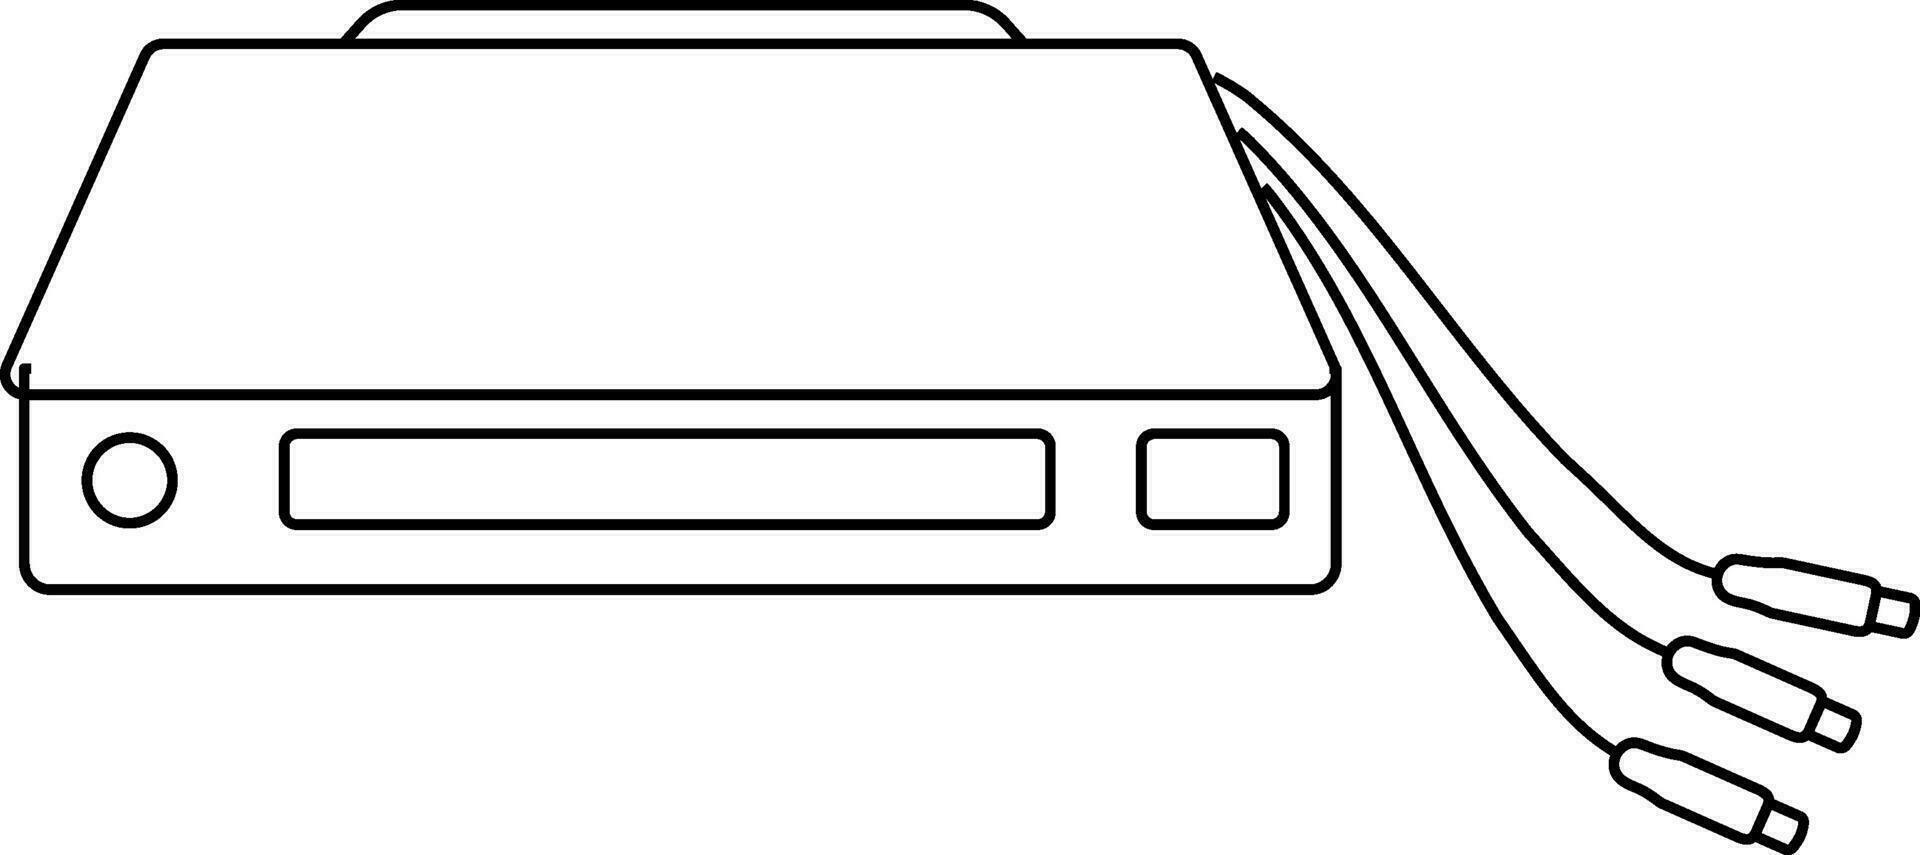 Hard drive with wire in black line art. vector